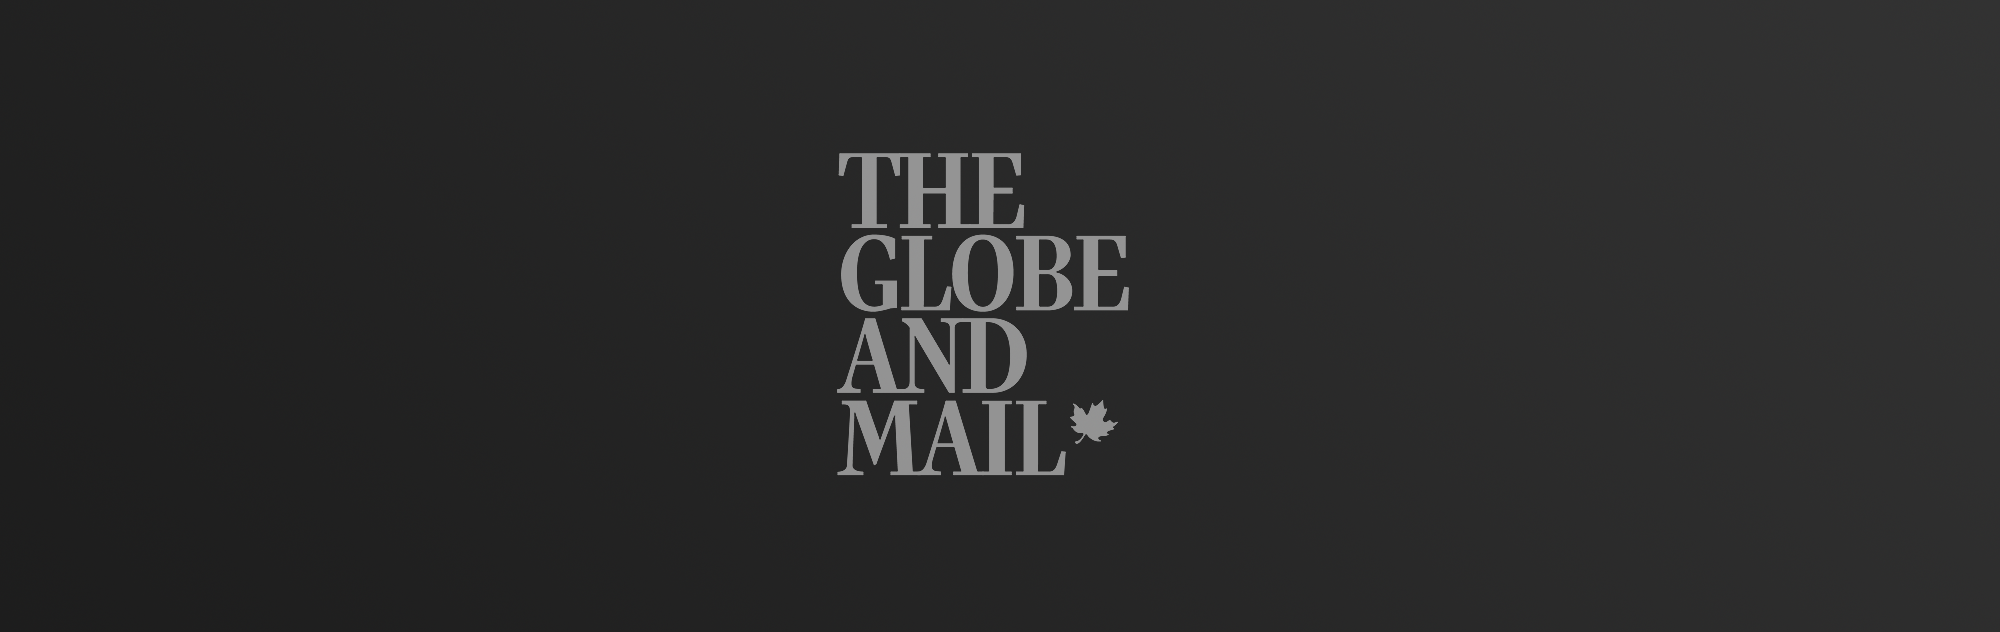 The Globe and Mail logo on dark gradient background